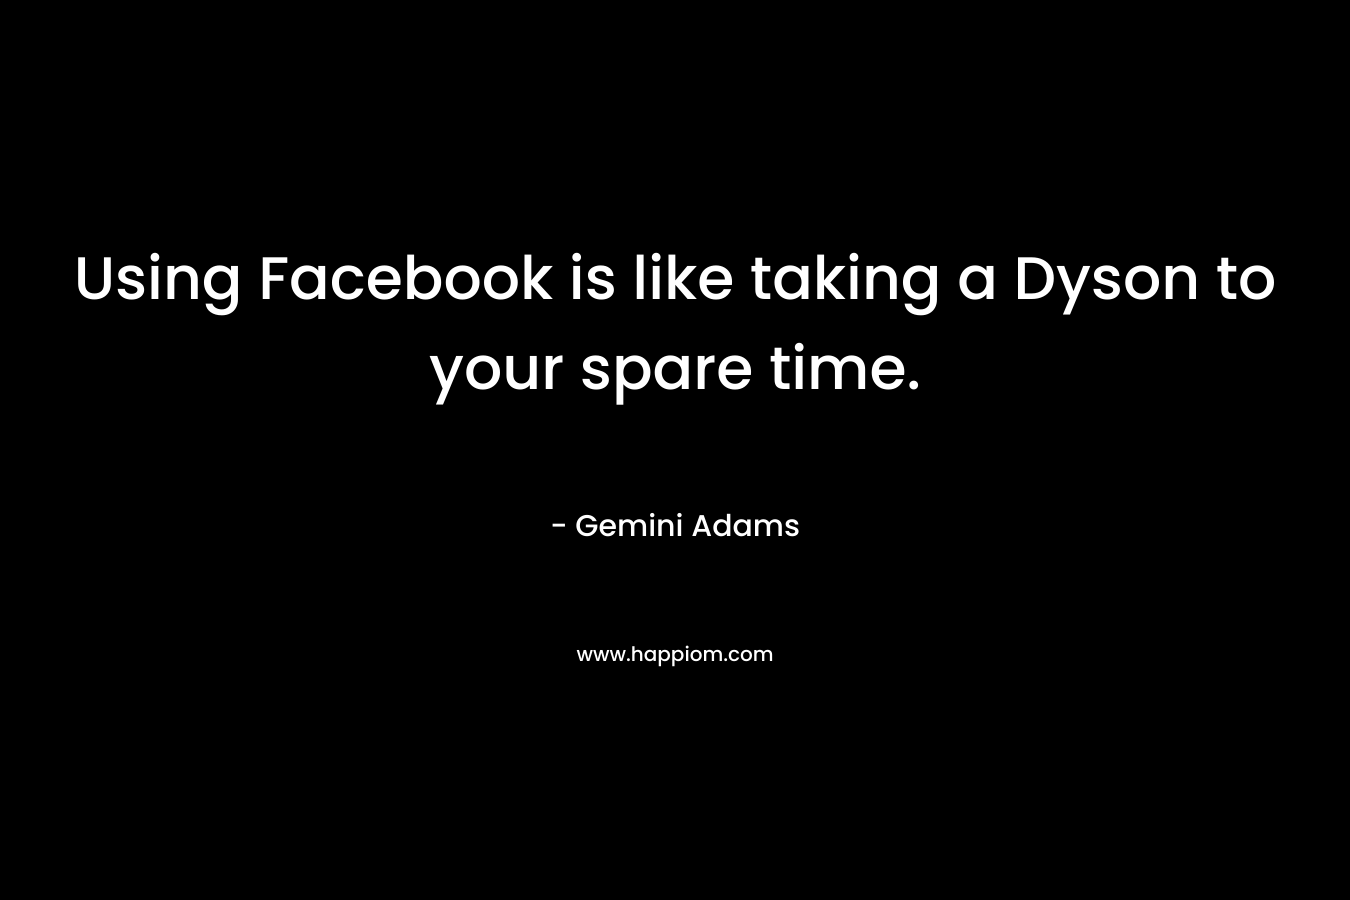 Using Facebook is like taking a Dyson to your spare time. – Gemini Adams